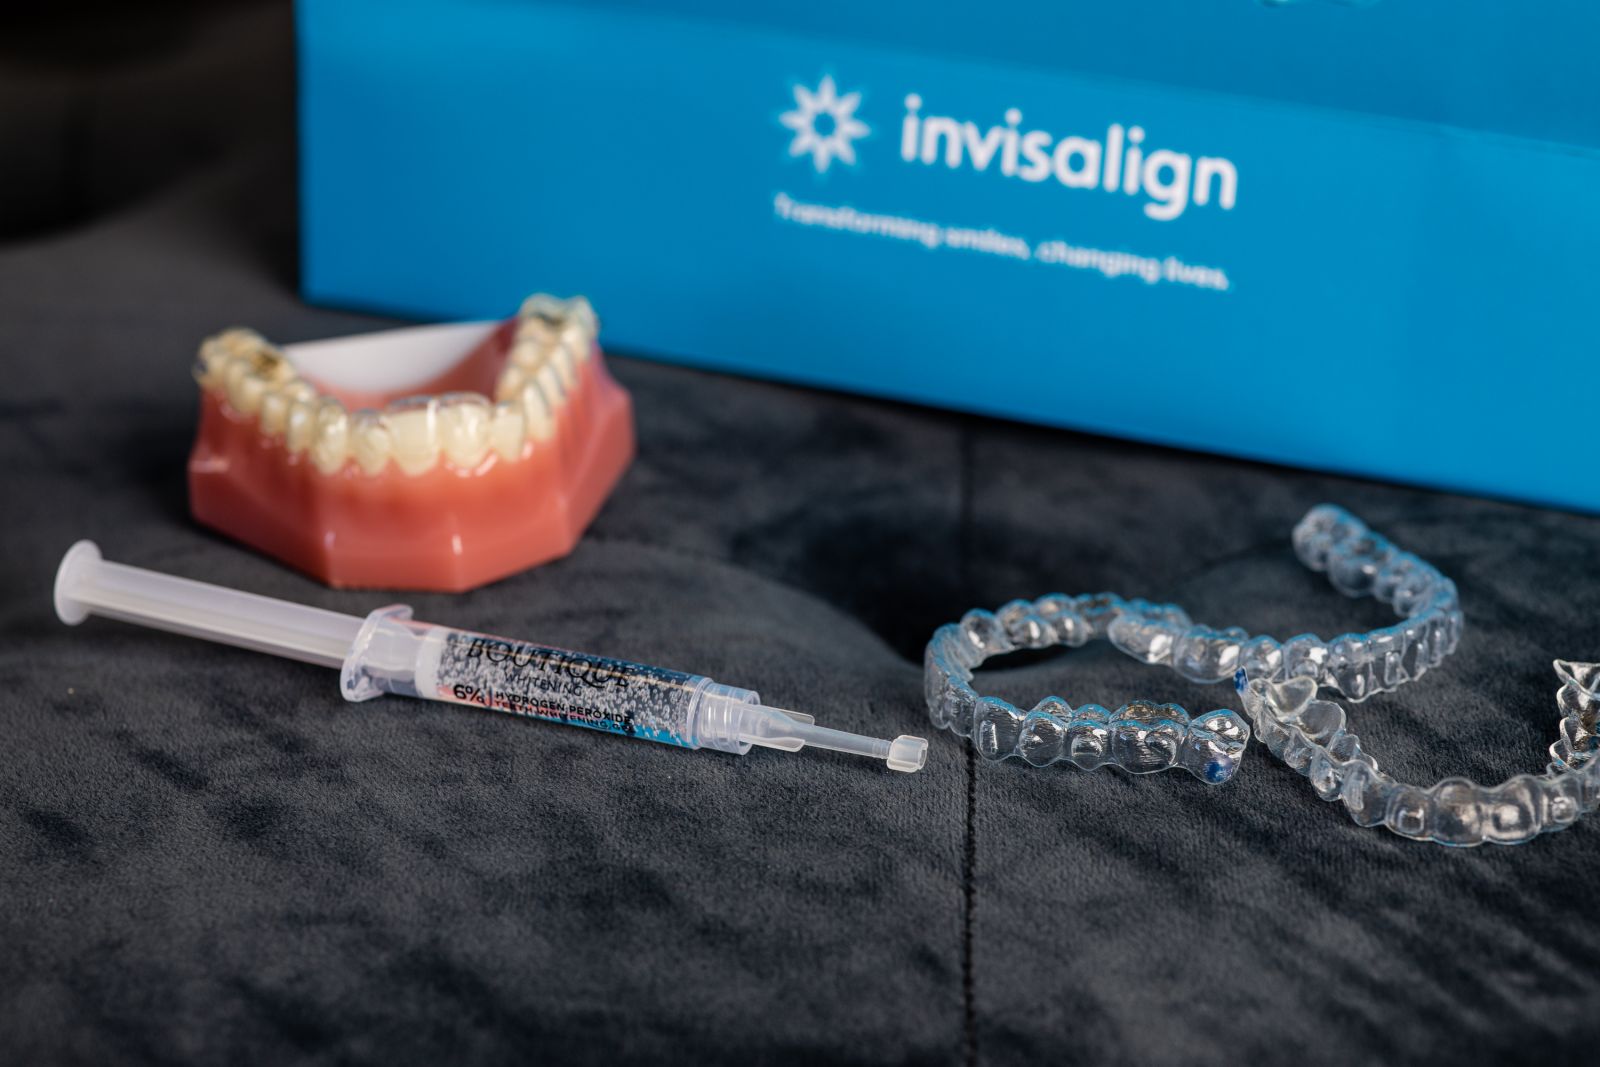 Why choose Dee Dental for Invisalign treatment